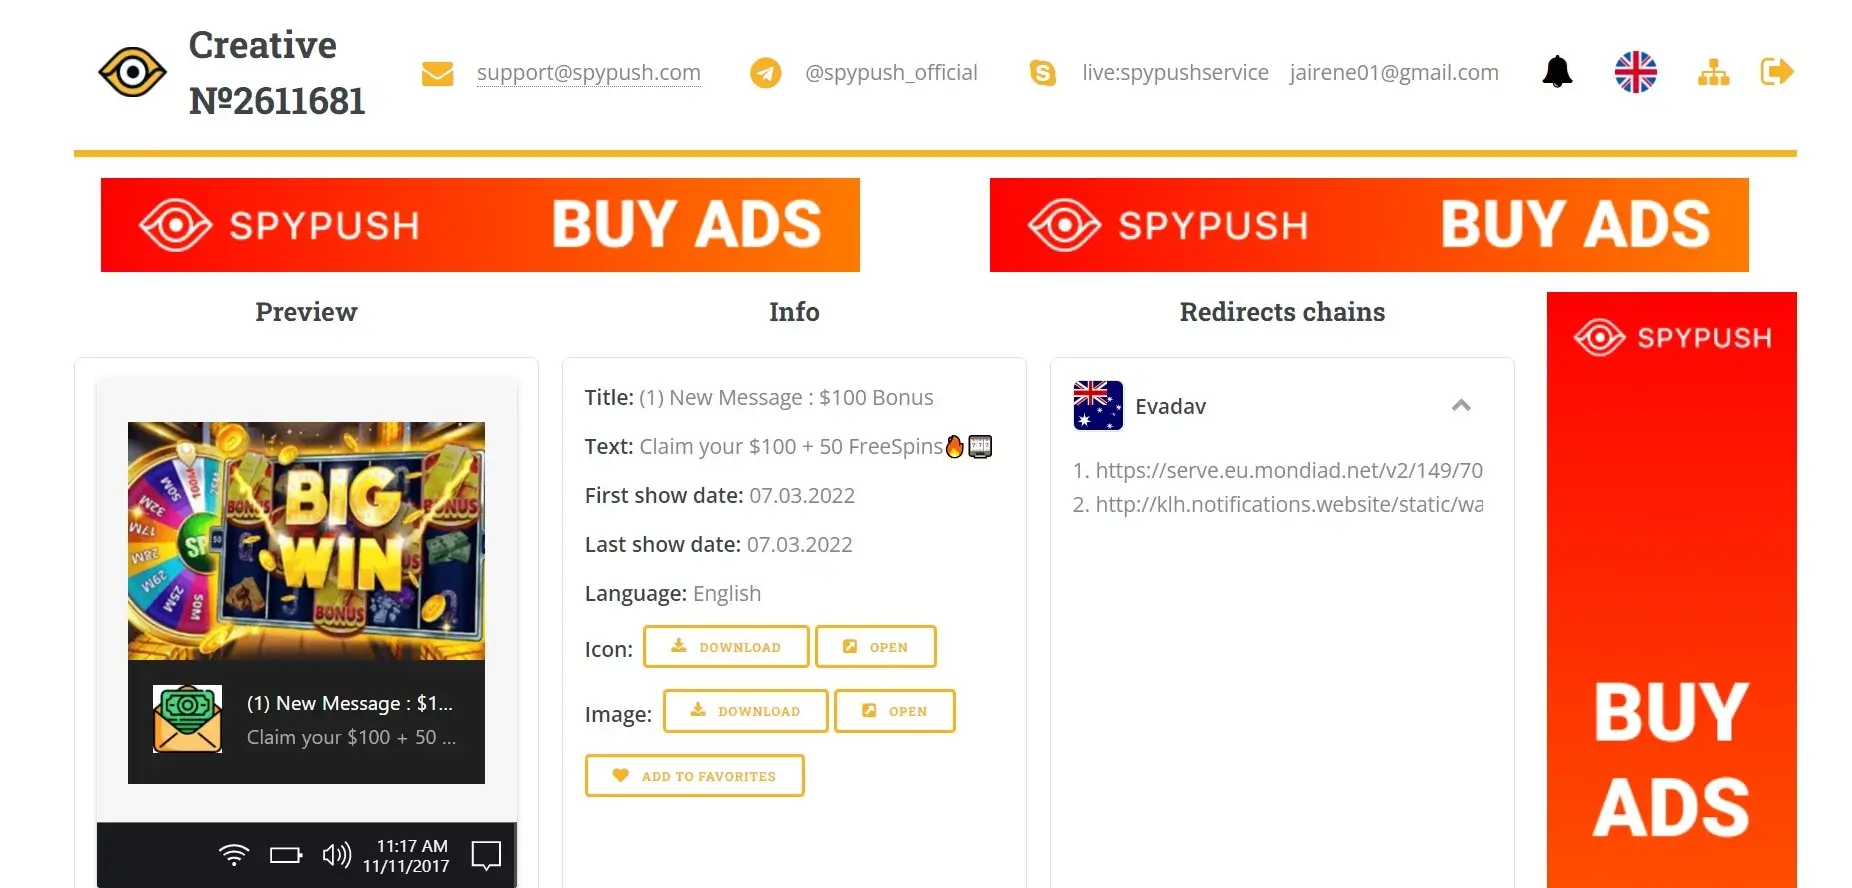 spypush creative destails for best ad spy tools post